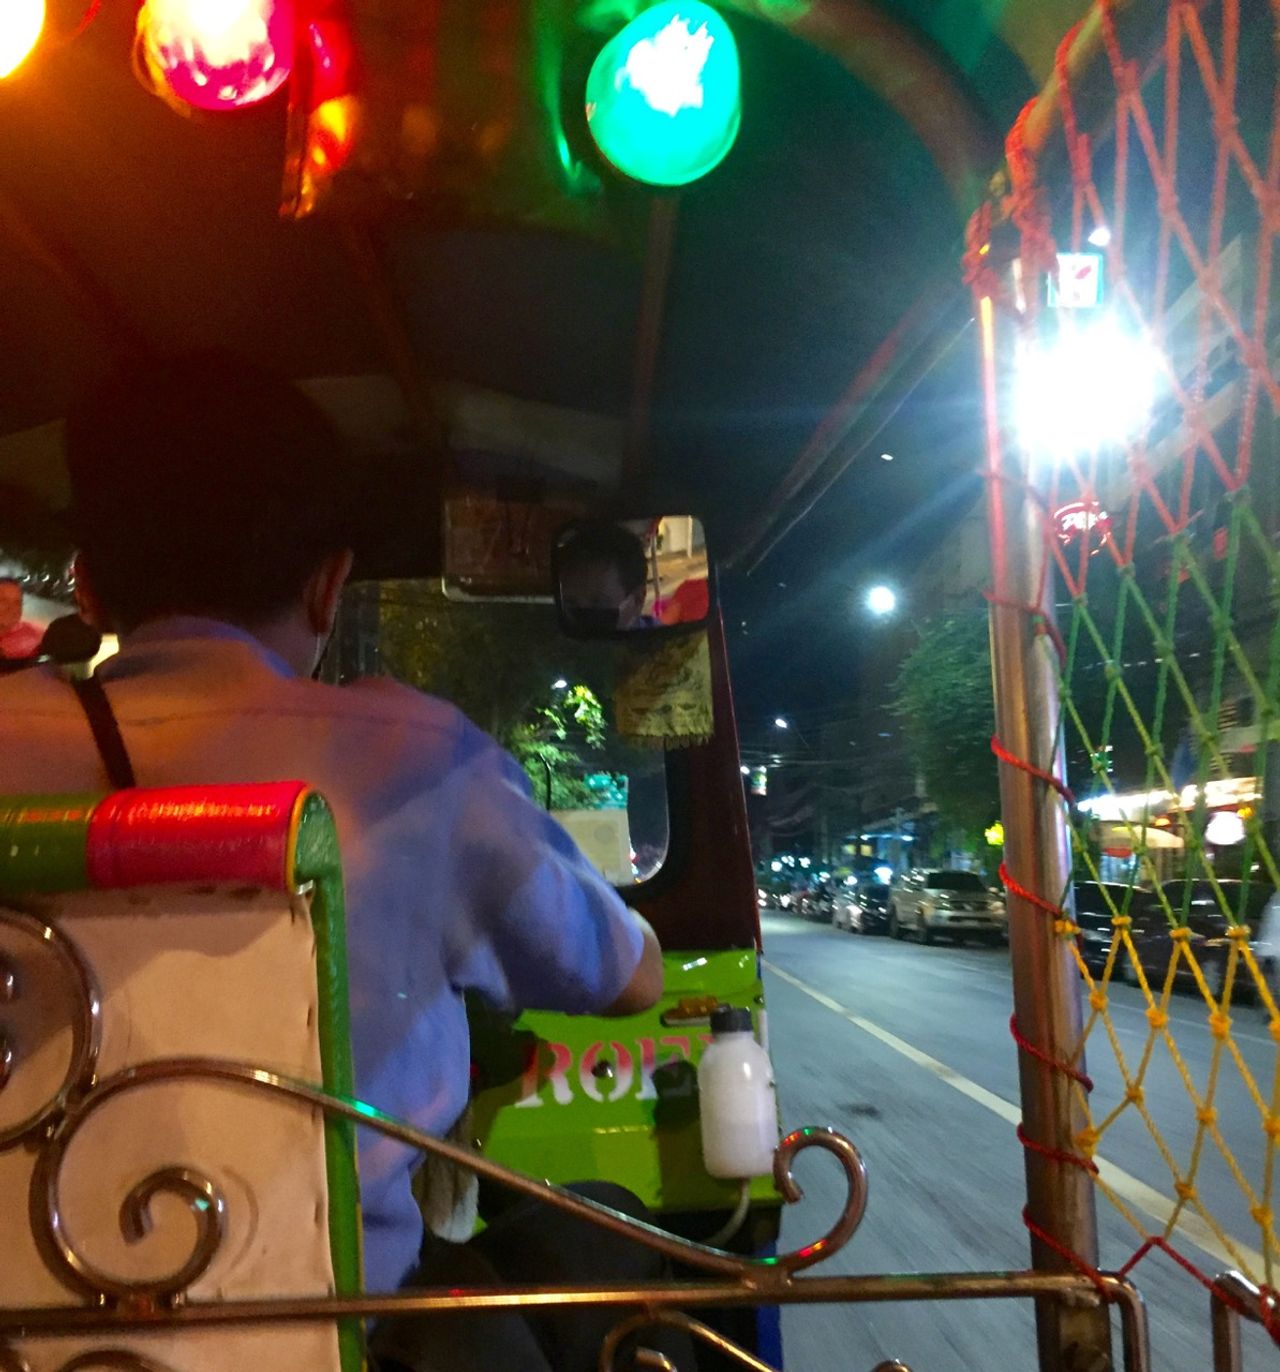 Riding in the back of a tuk tuk.